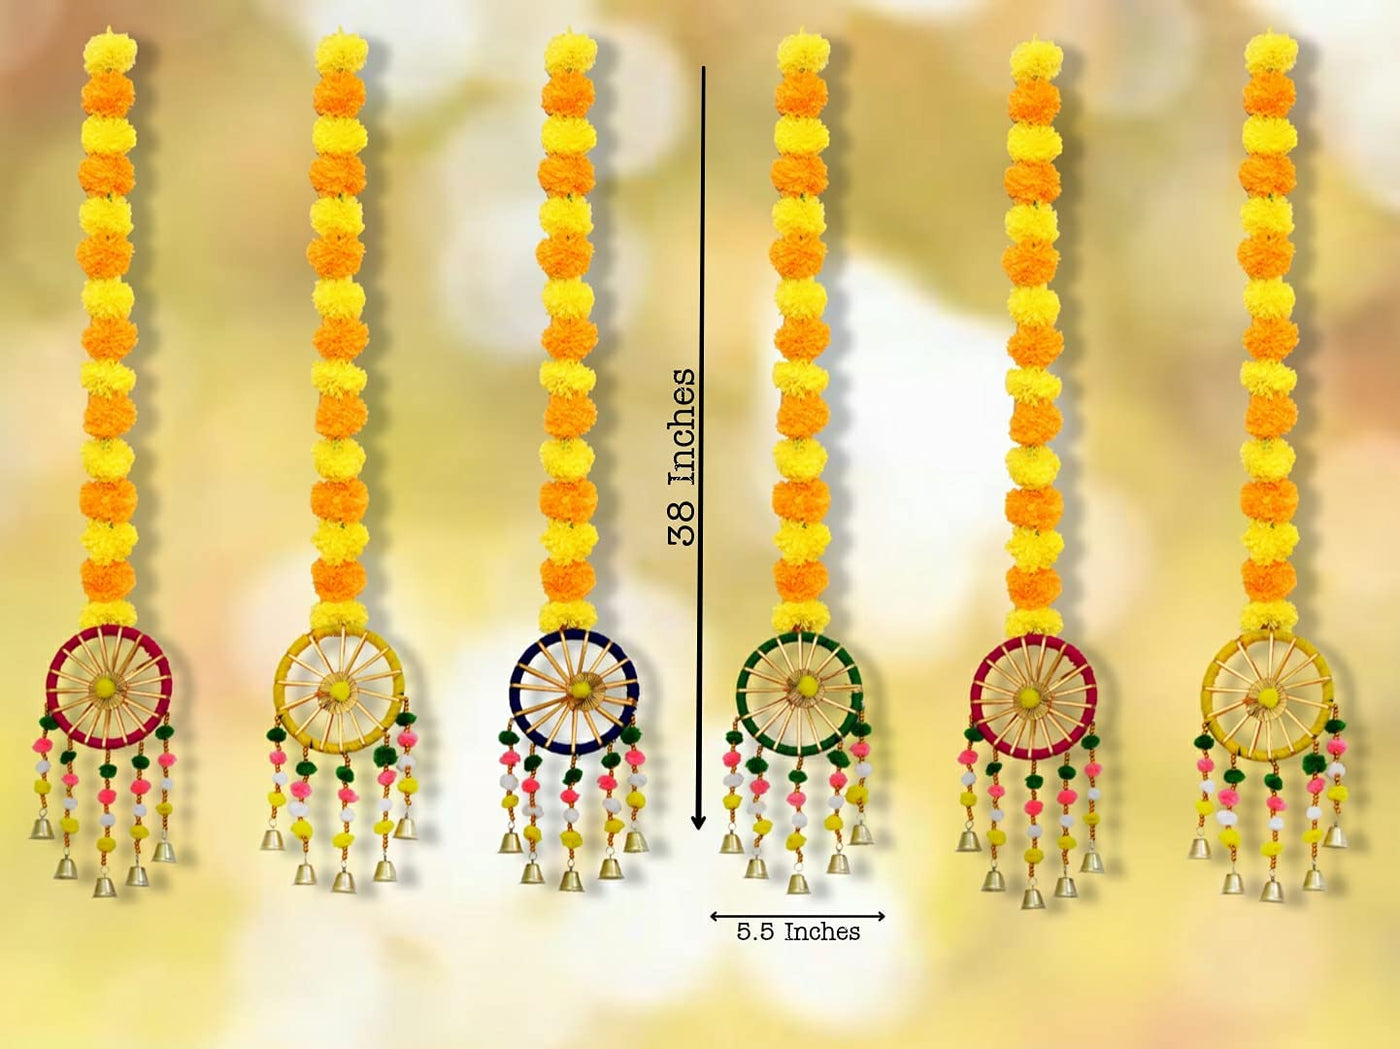 Lamansh Multicolor / Wood / 6 LAMANSH® Pack of 6 Handmade Artificial Marigold Flowers Colorful Ring Pom Pom Hanging for Home/Office